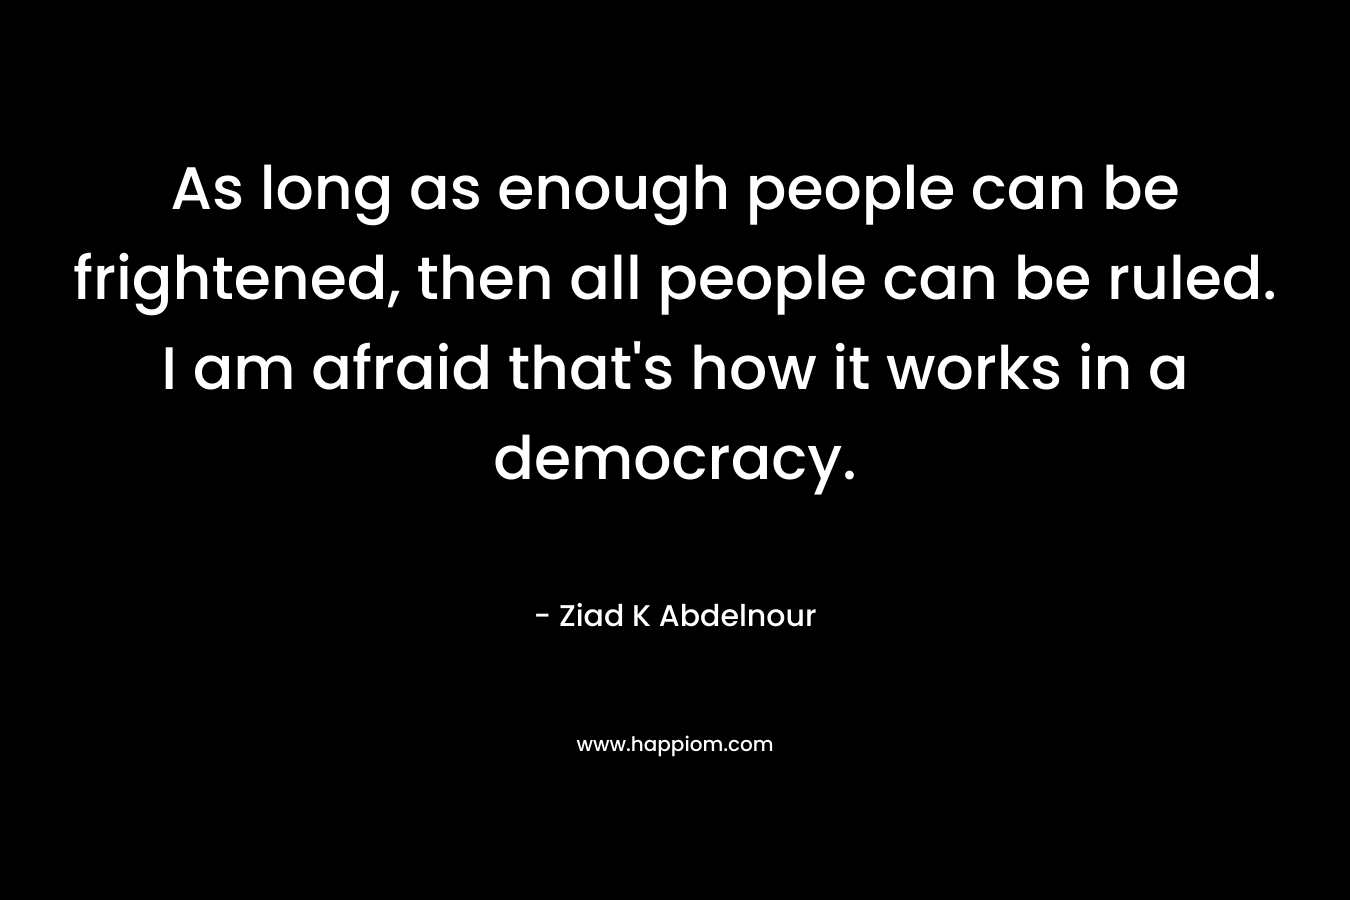 As long as enough people can be frightened, then all people can be ruled. I am afraid that’s how it works in a democracy. – Ziad K Abdelnour